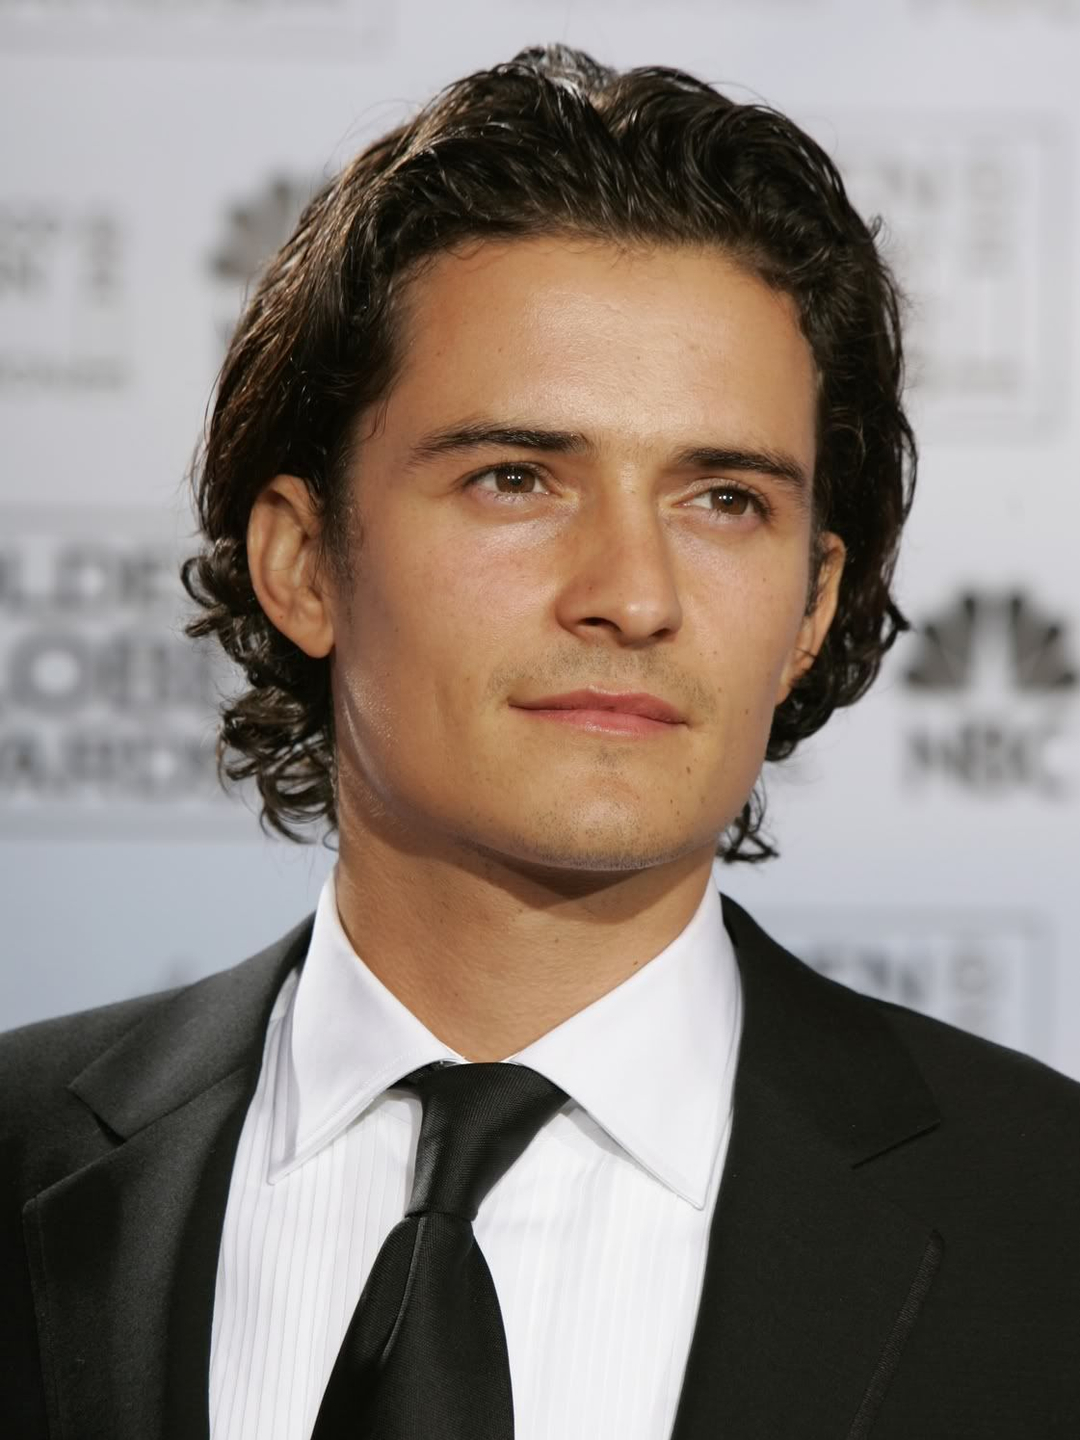 Orlando Bloom how did he became famous